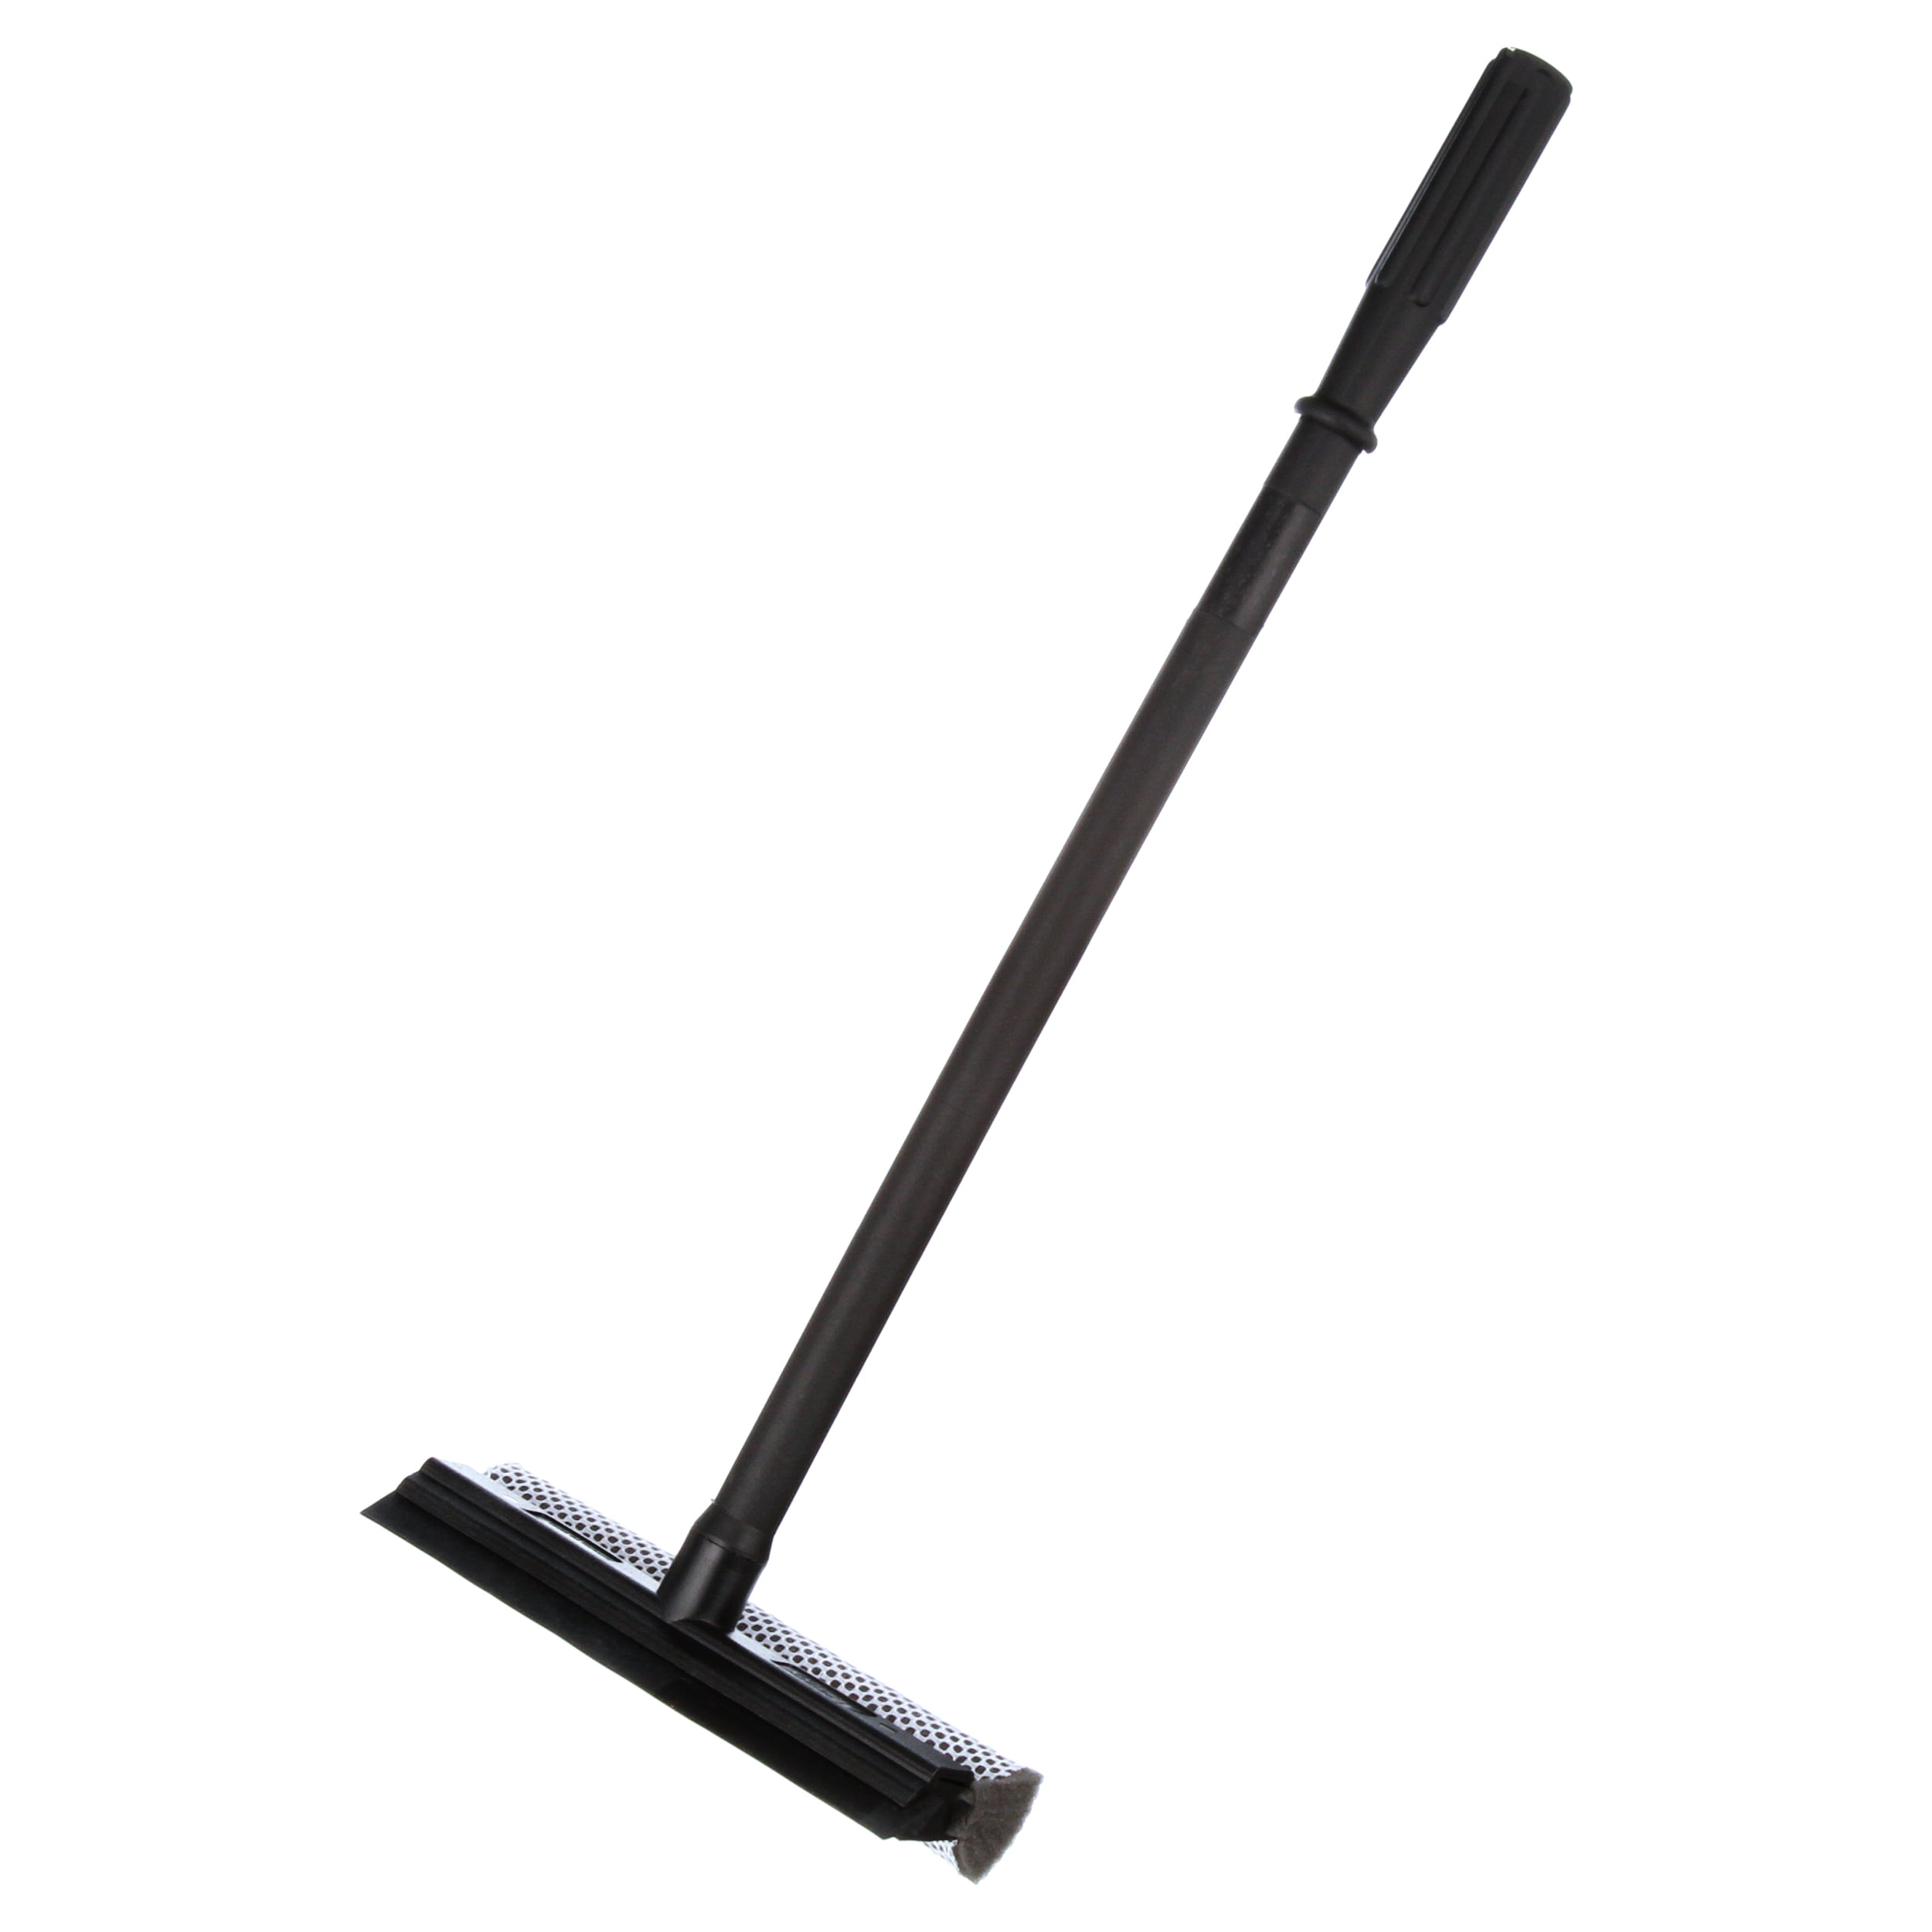 Polyte Window Squeegee for Car Windshields and Window Cleaning Tool,  Extendable Aluminum Handle 14-20 in. (Black)